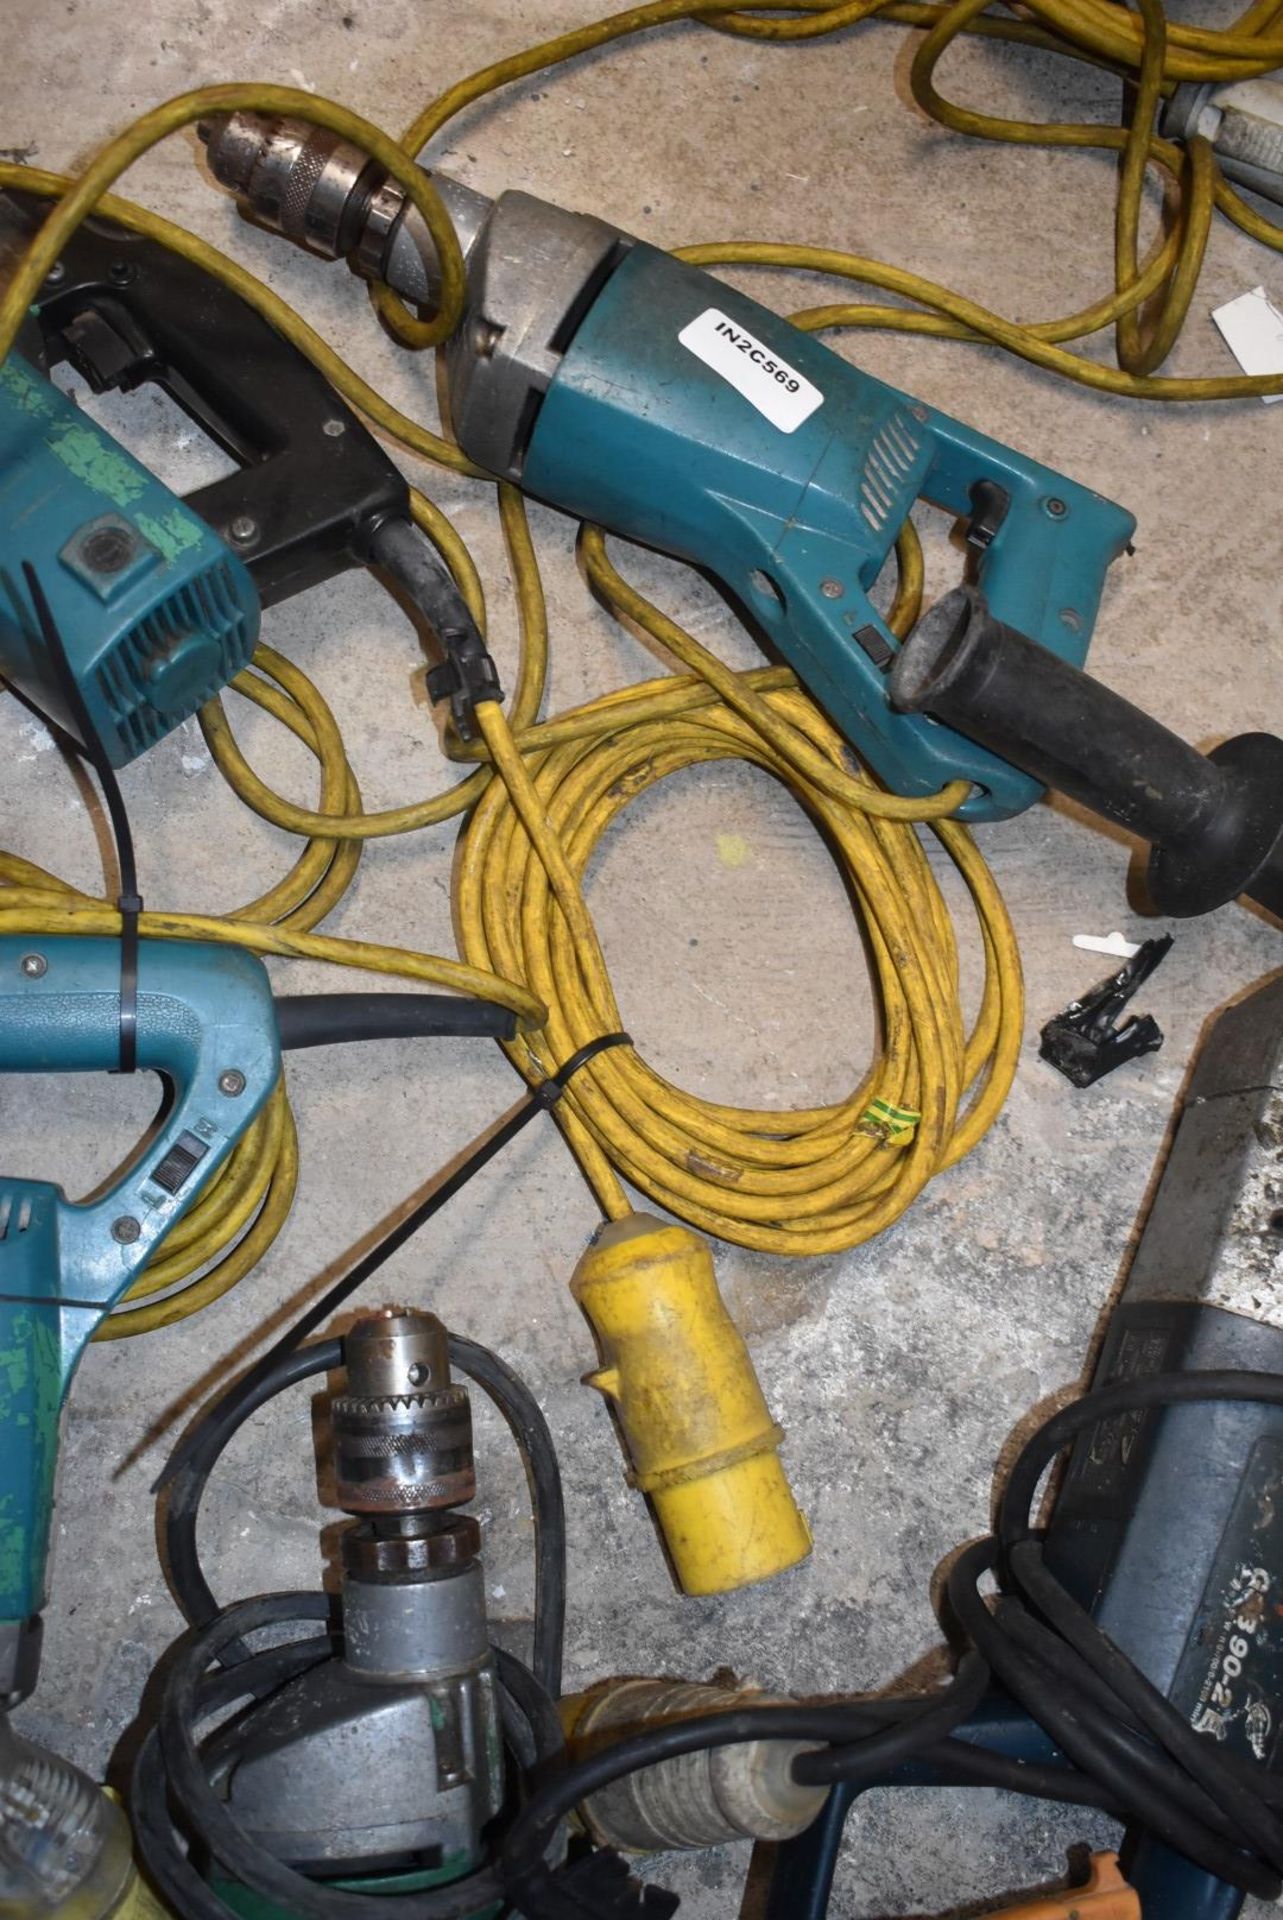 5 x Industrial 110v Power Tools Including Various Drills - Image 6 of 6